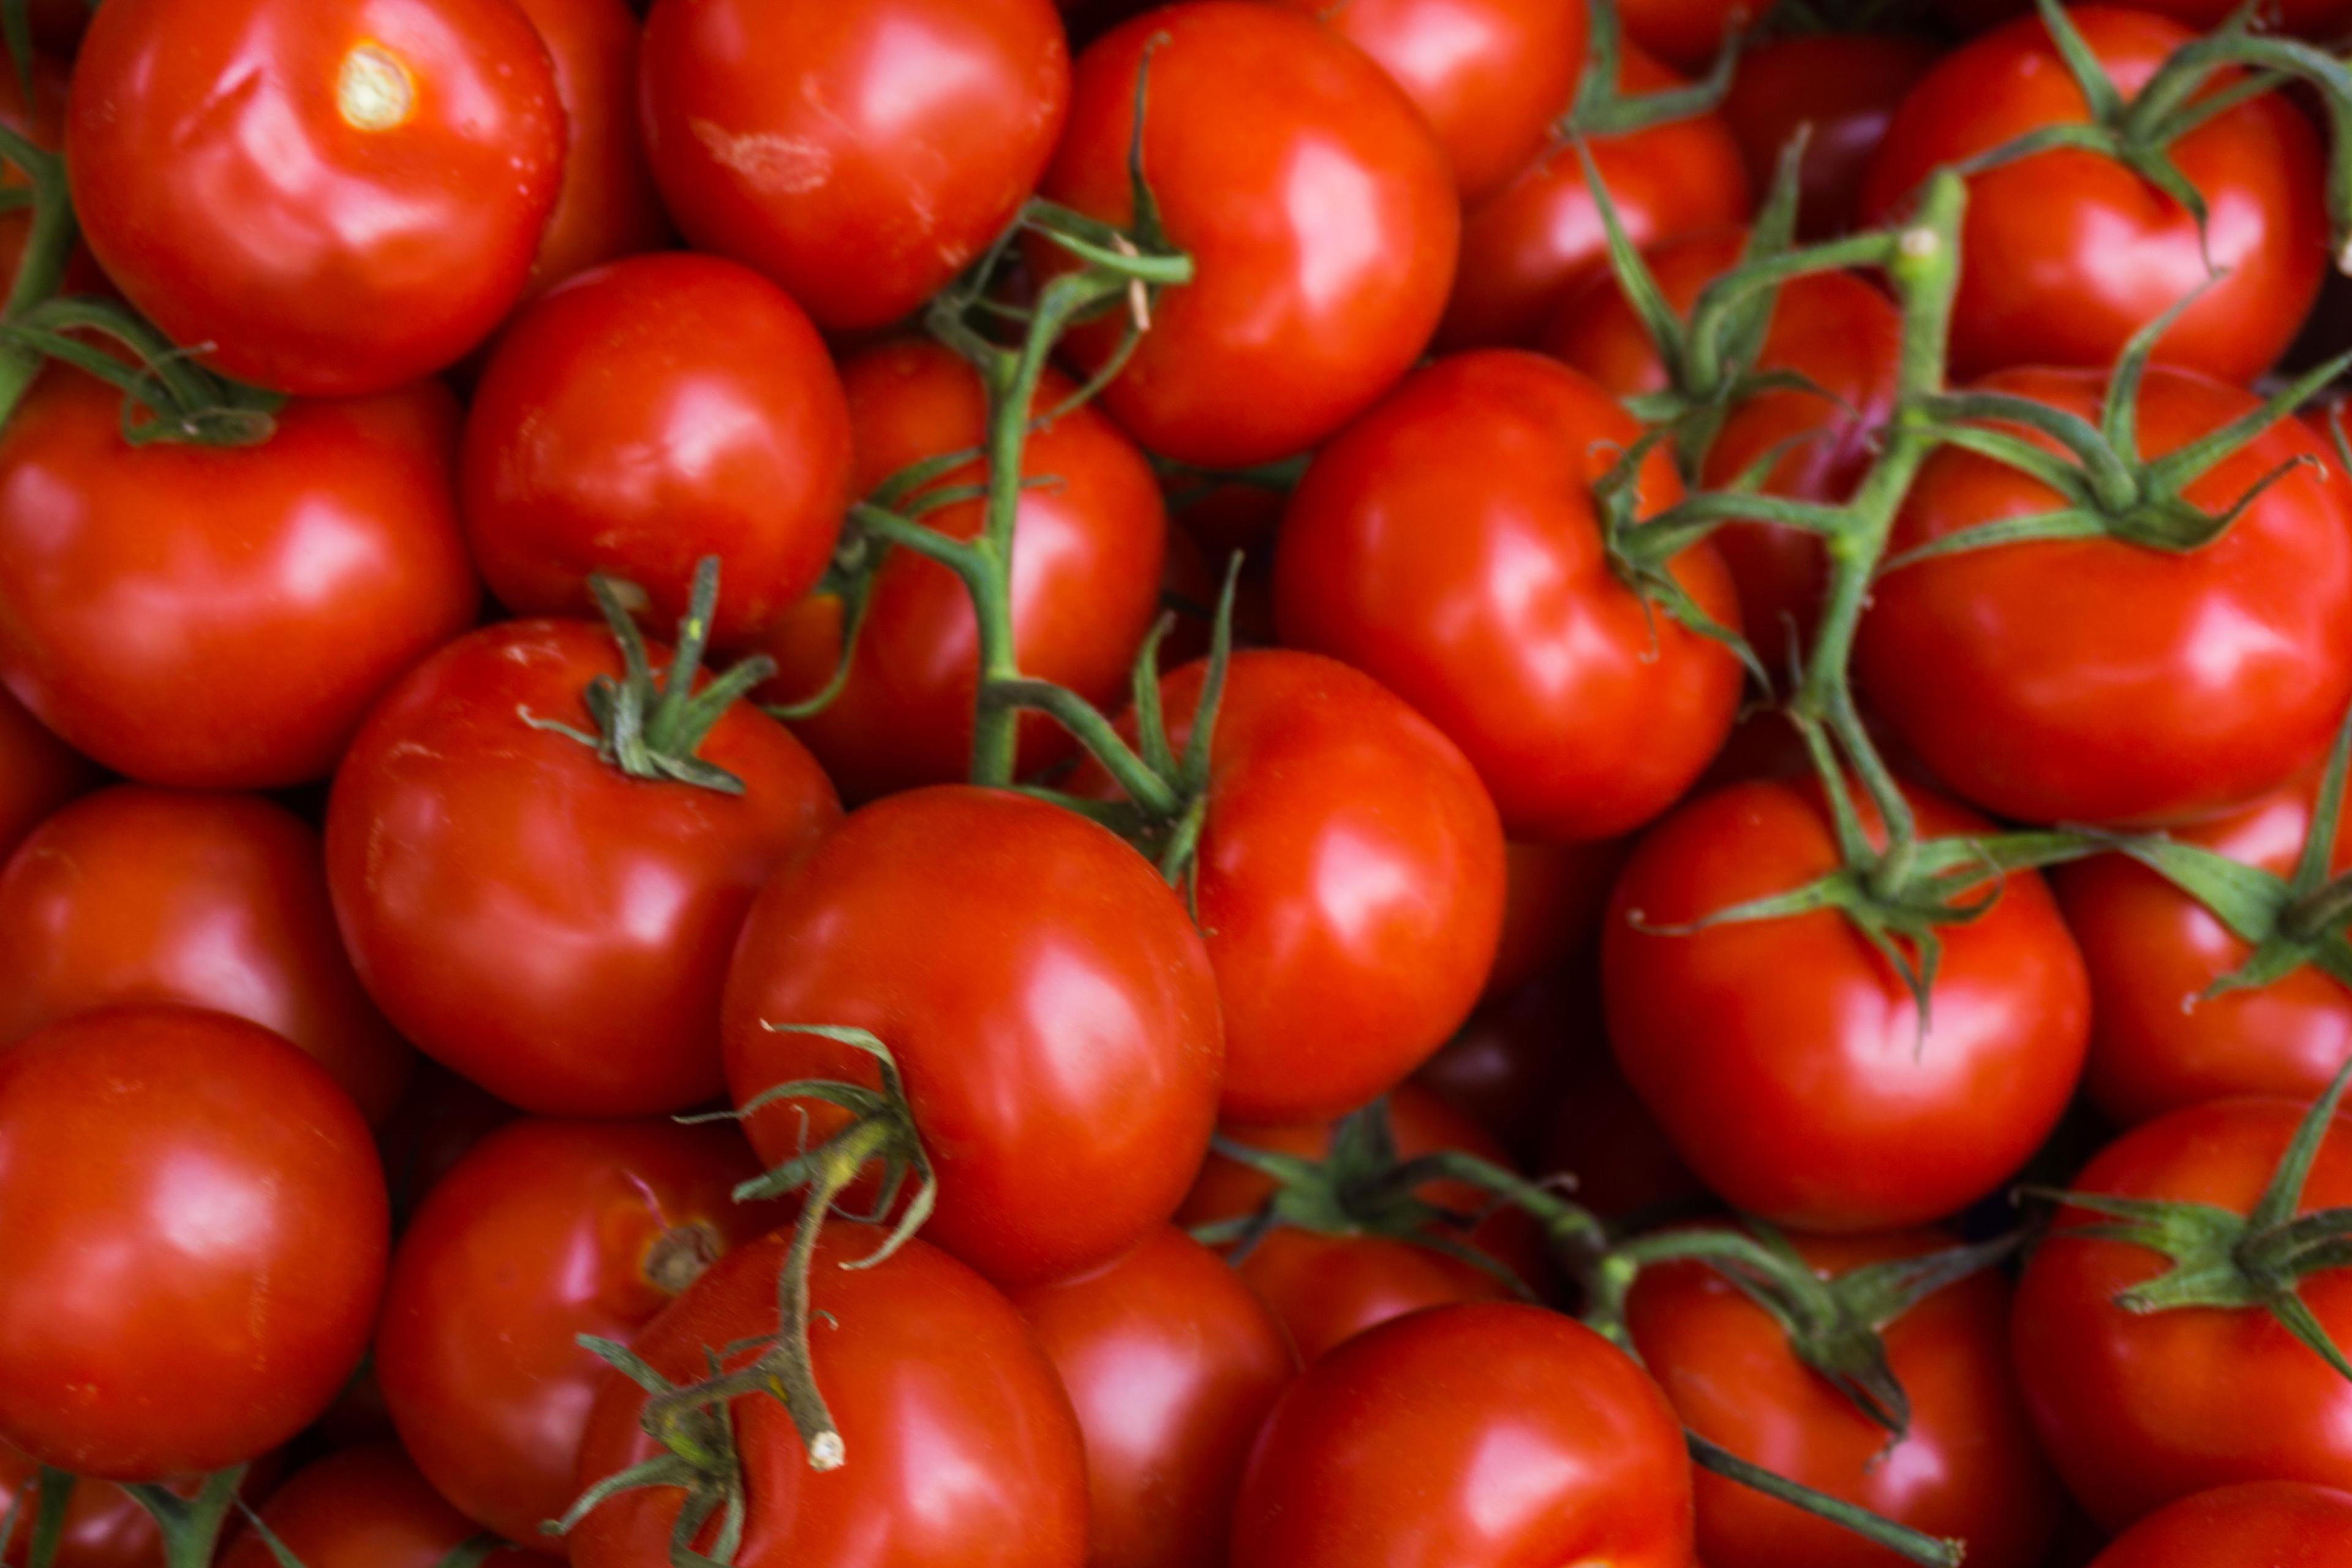 Tomatoes’ Benefits: 5 Healthy Facts for You to Know